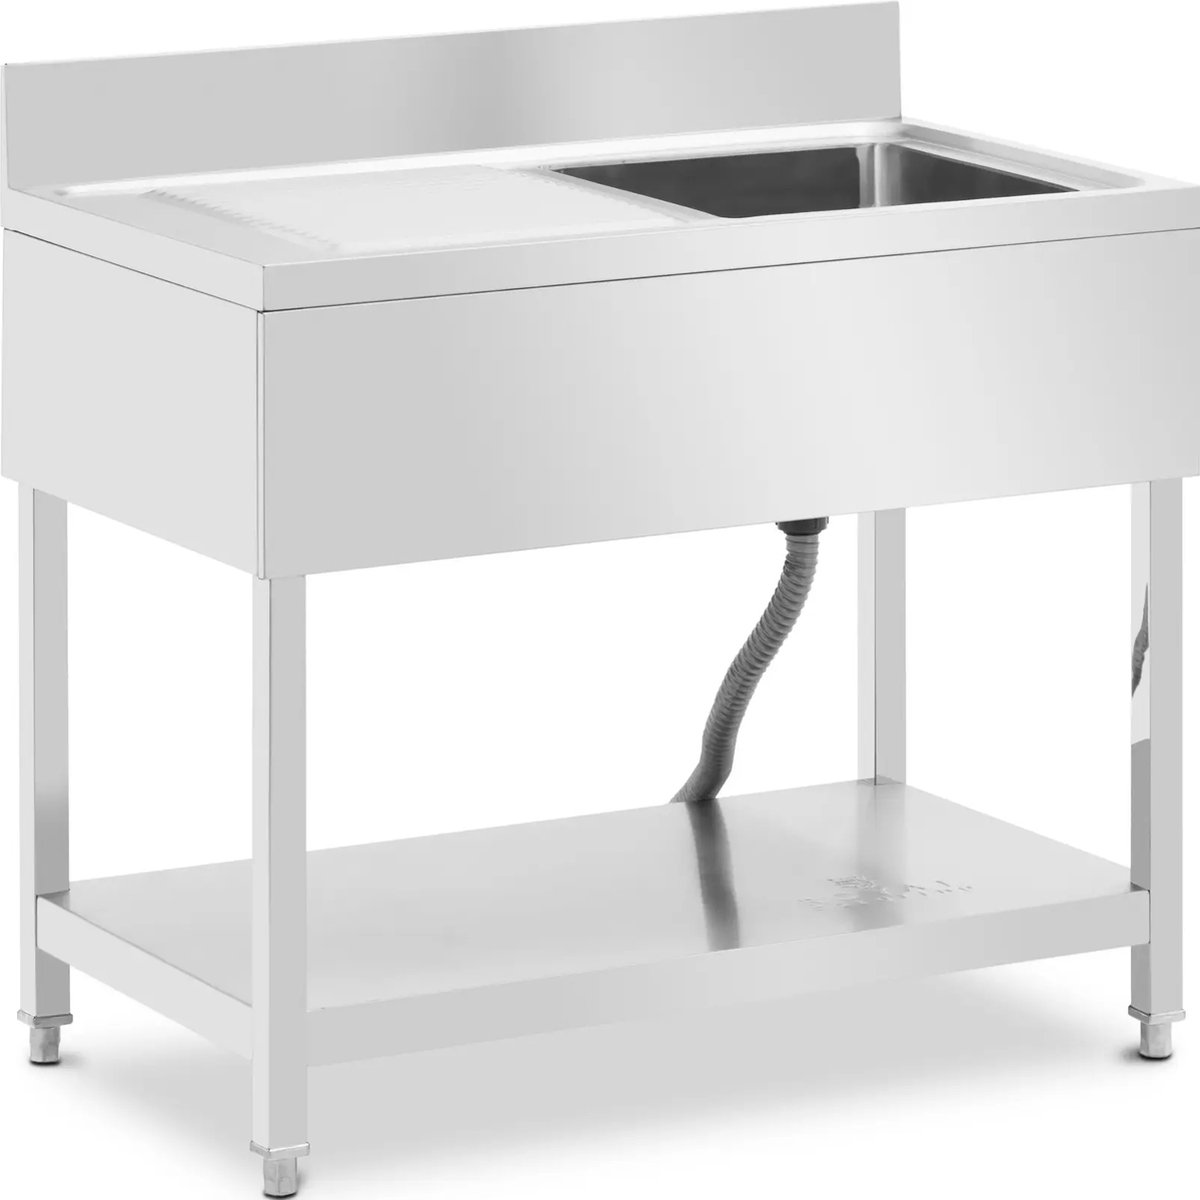 Royal Catering Rinse Table - 1 bekken - roestvrij staal - 100 x 60 x 97 cm - Royal Catering